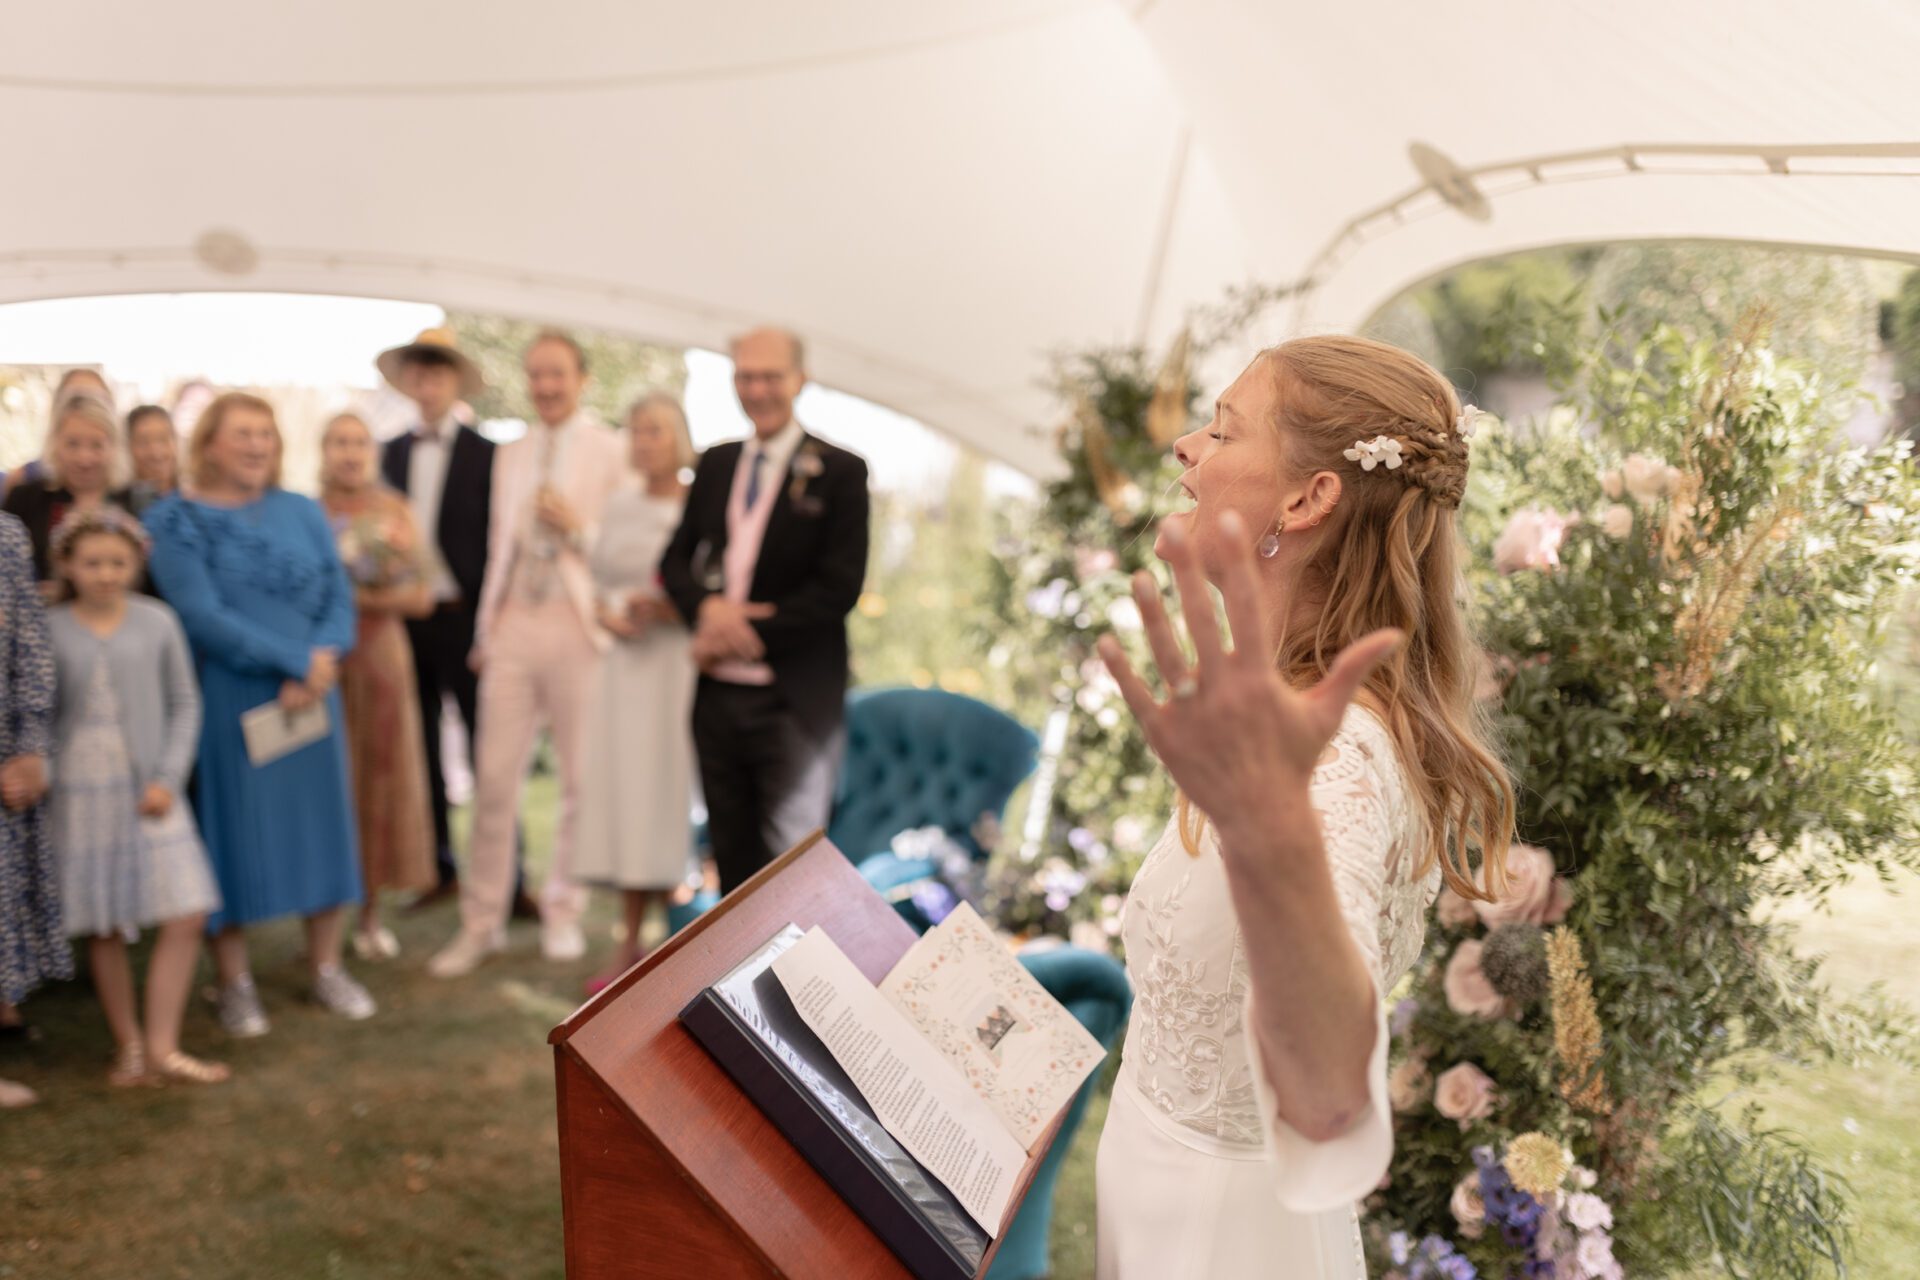 The bride gives a wedding speech at Brickwall House